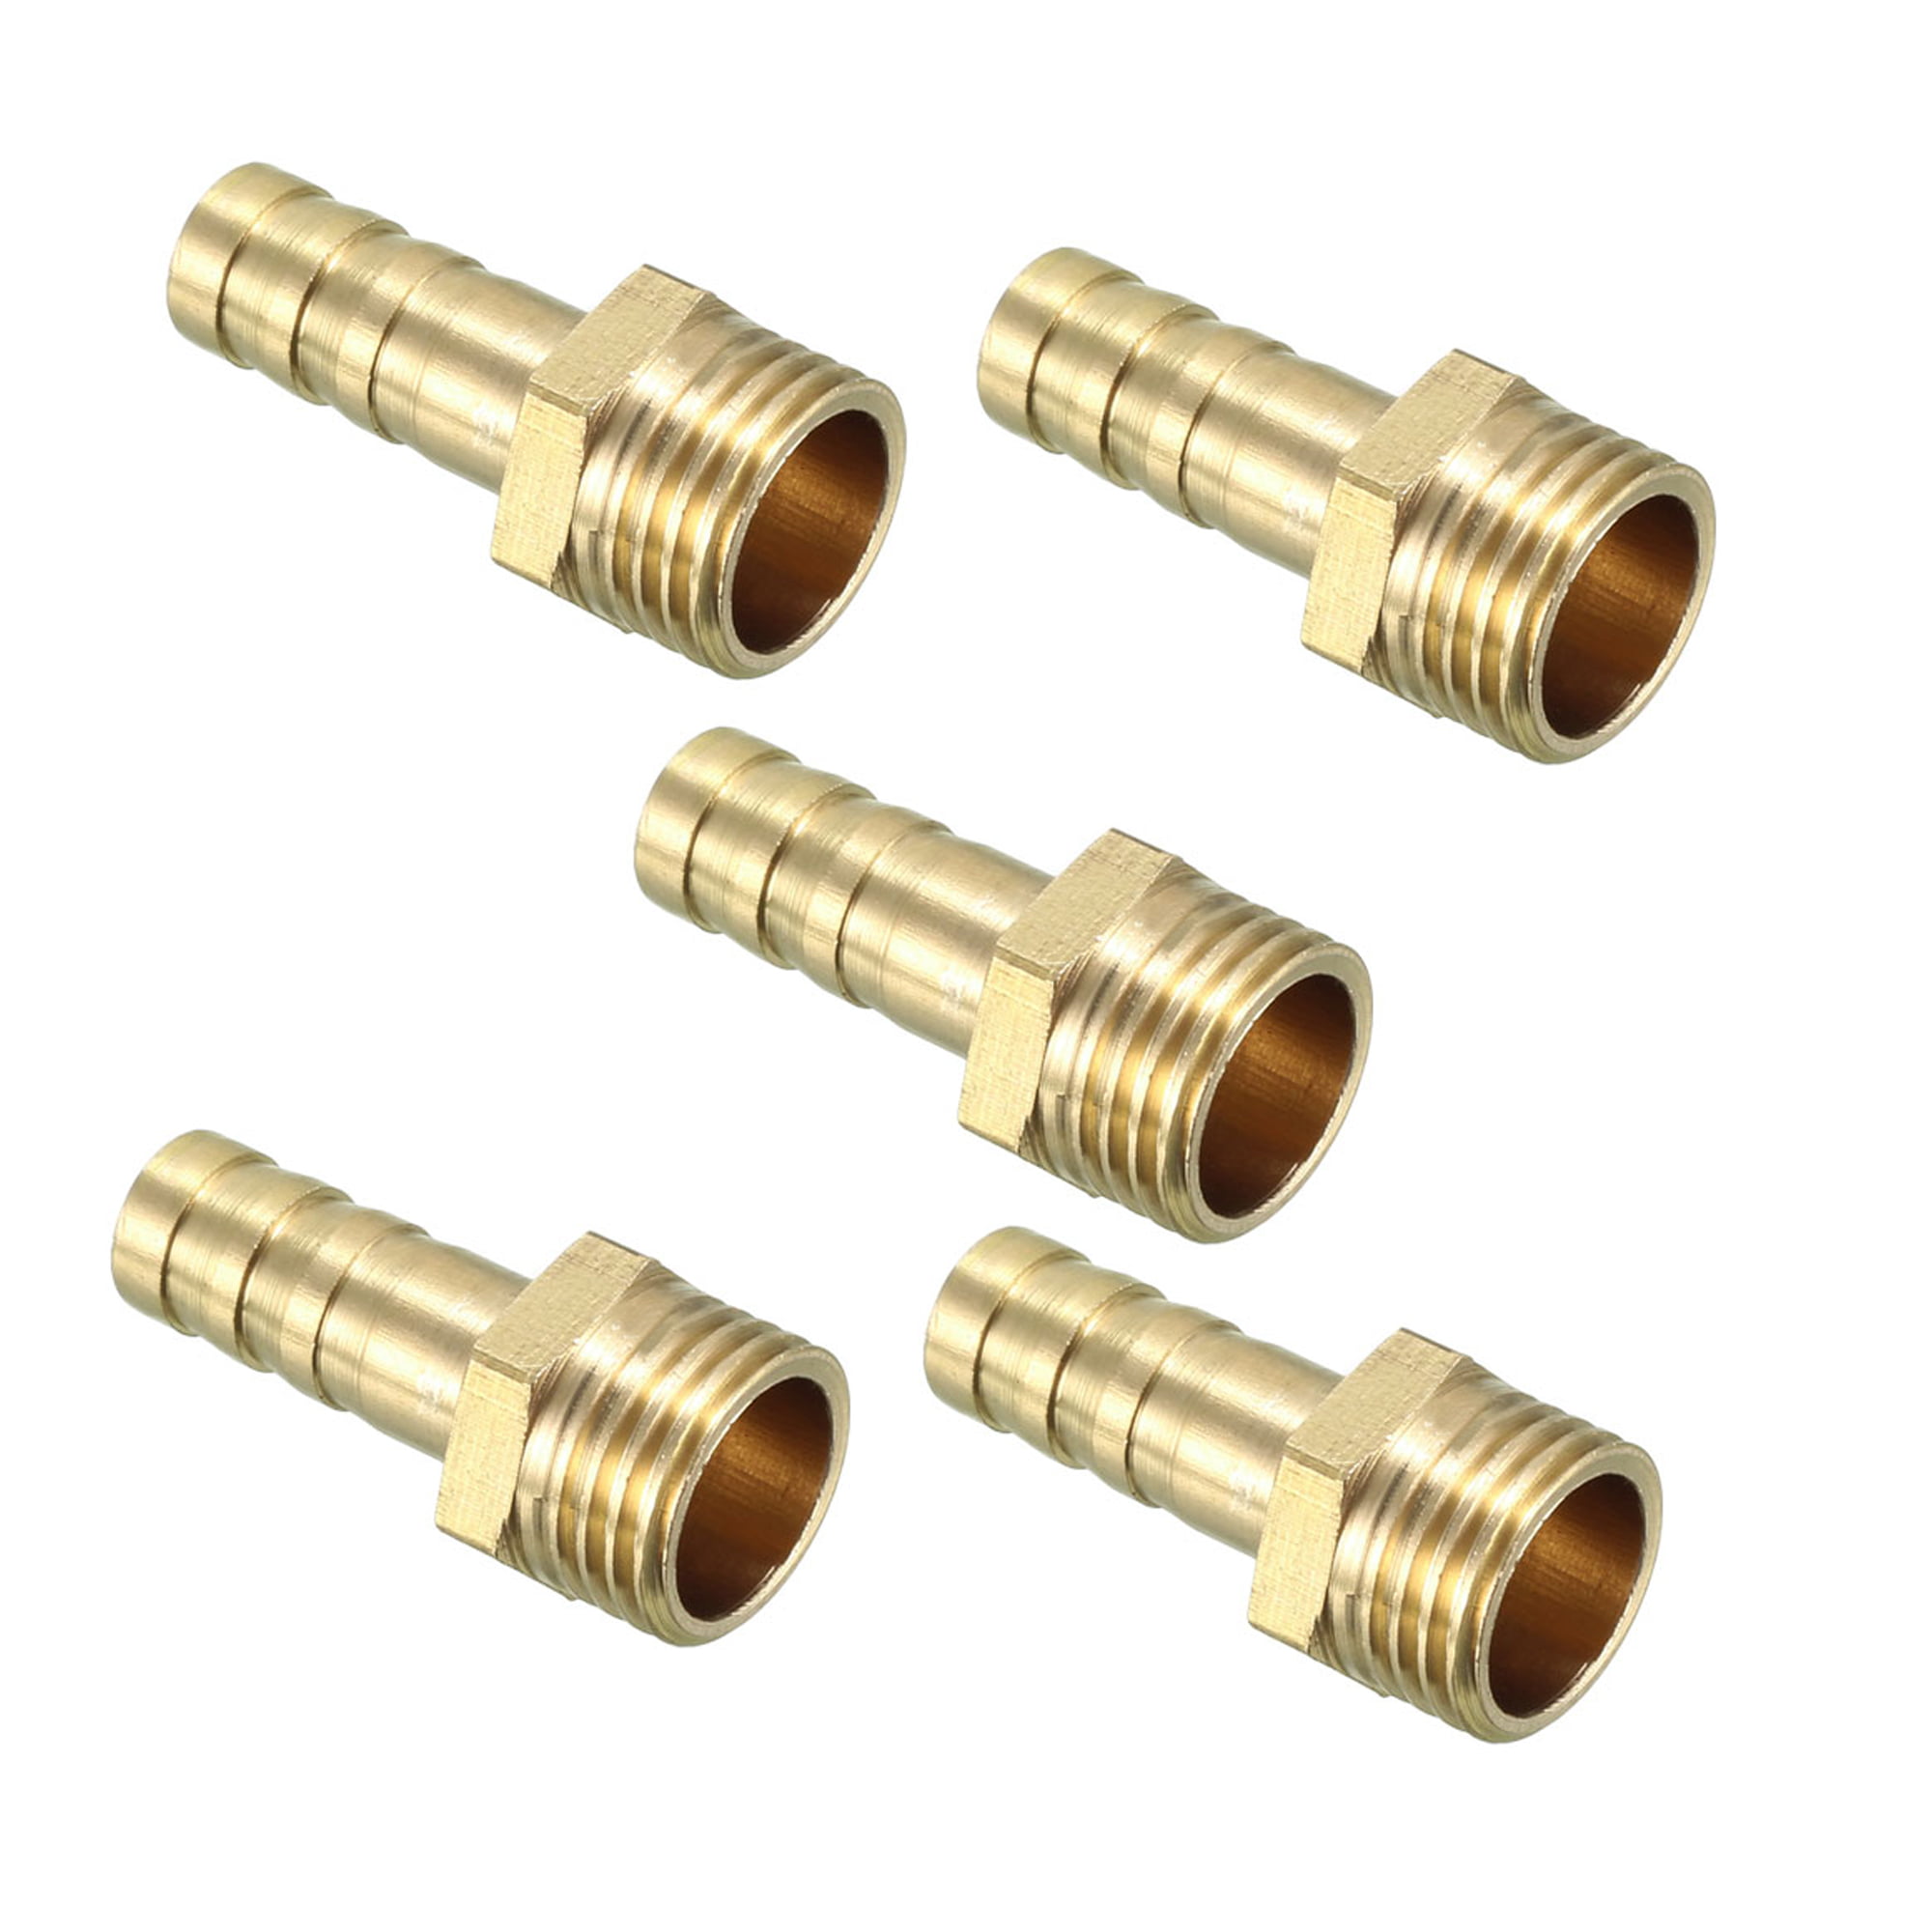 uxcell 1//8BSP Male Thread 10mm Hose Barbed Fitting Right Angle Elbow Connector 2pcs